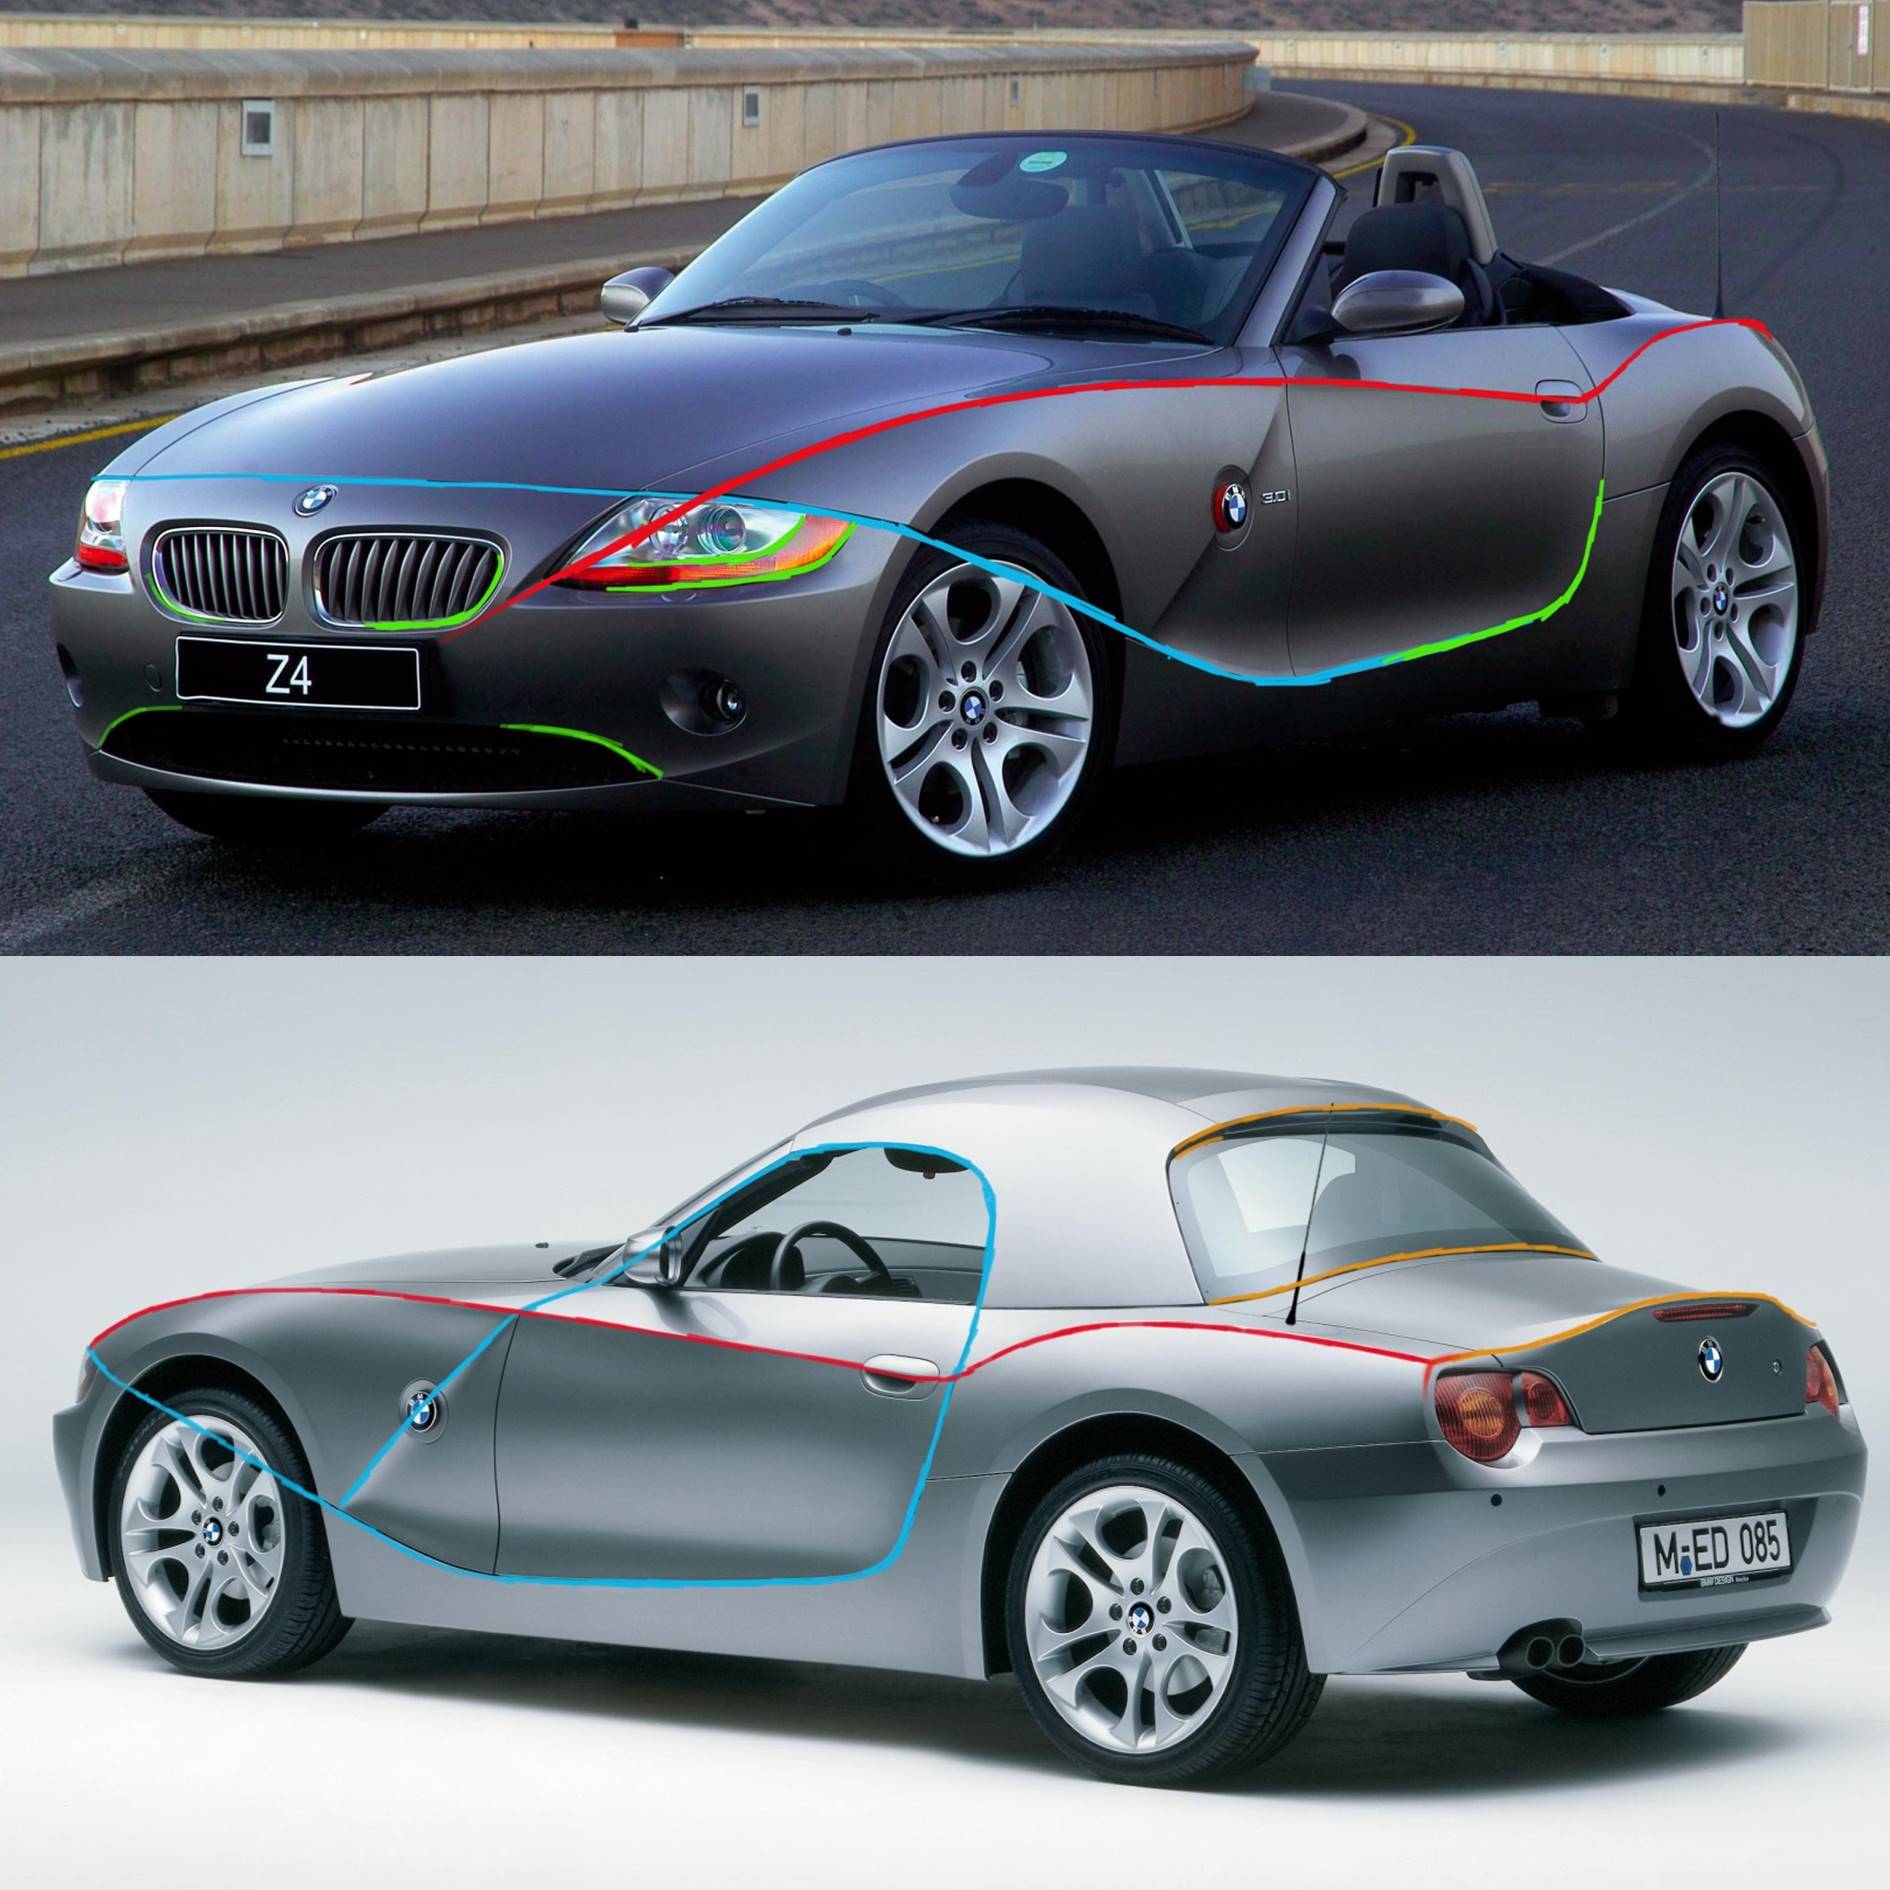 Pictures of the Z4 diagonally from the front and diagonally from the back with colored lines drawn across it.